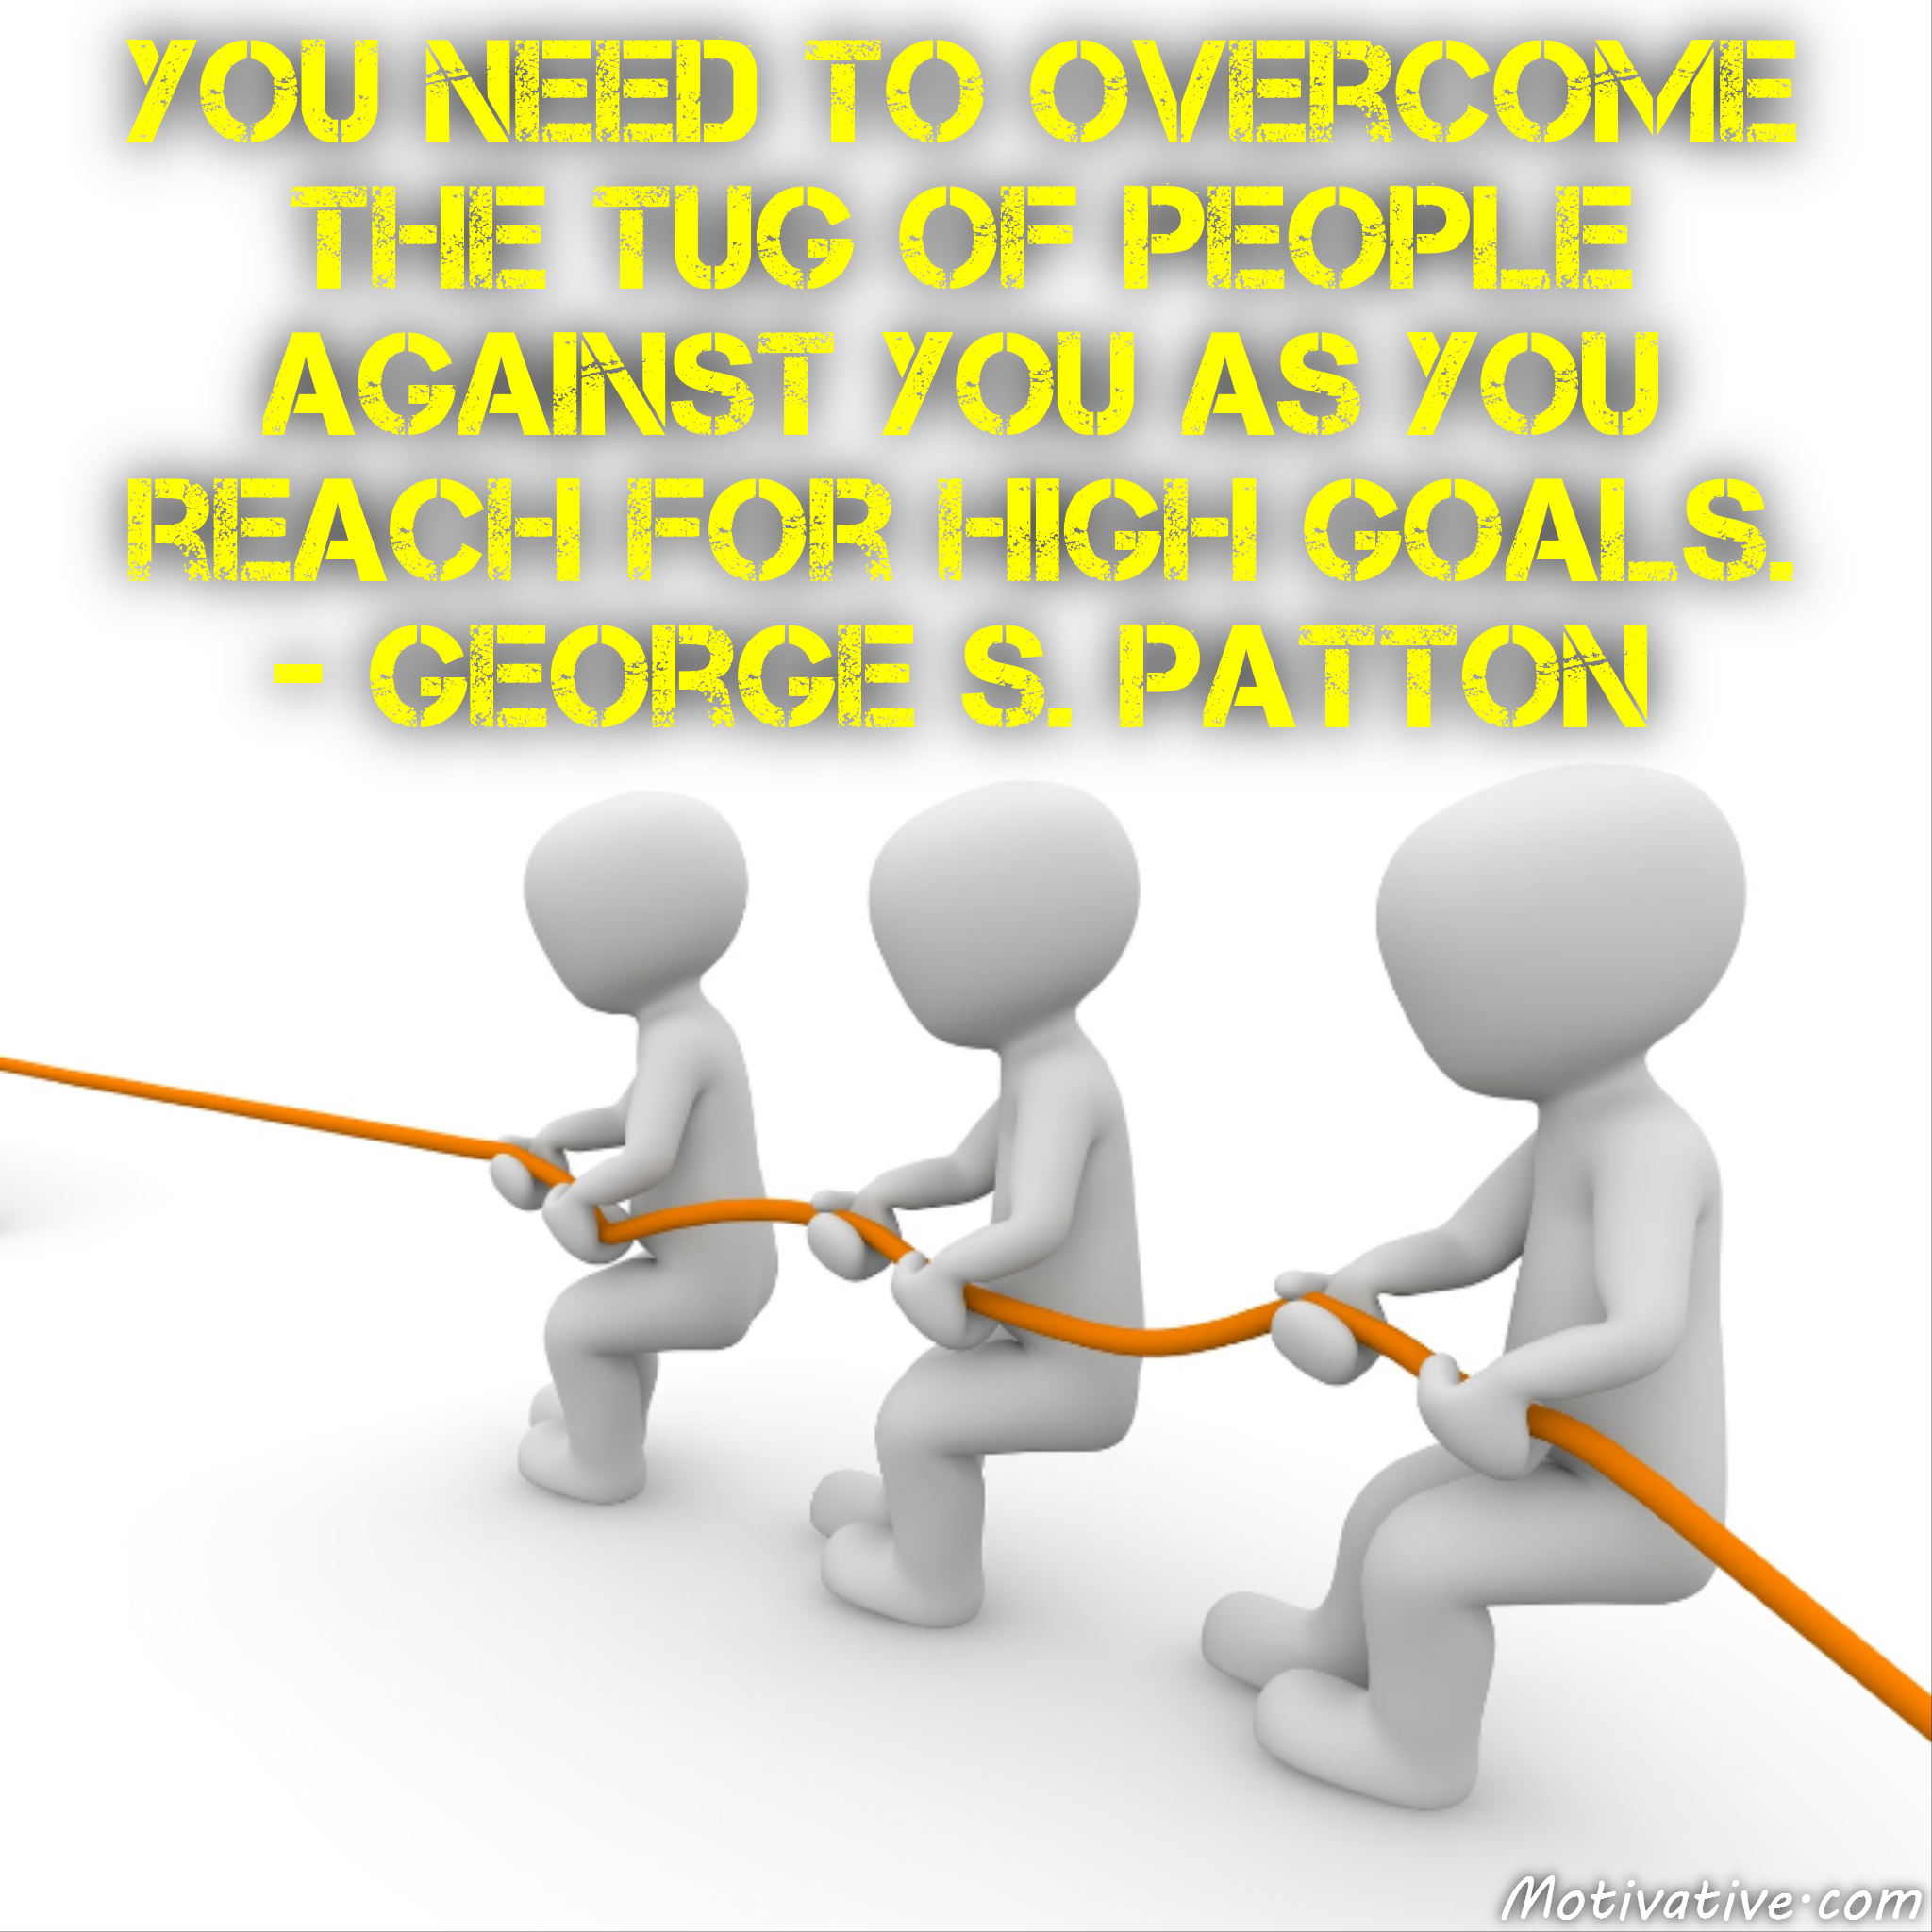 You need to overcome the tug of people against you as you reach for high goals. – George S. Patton